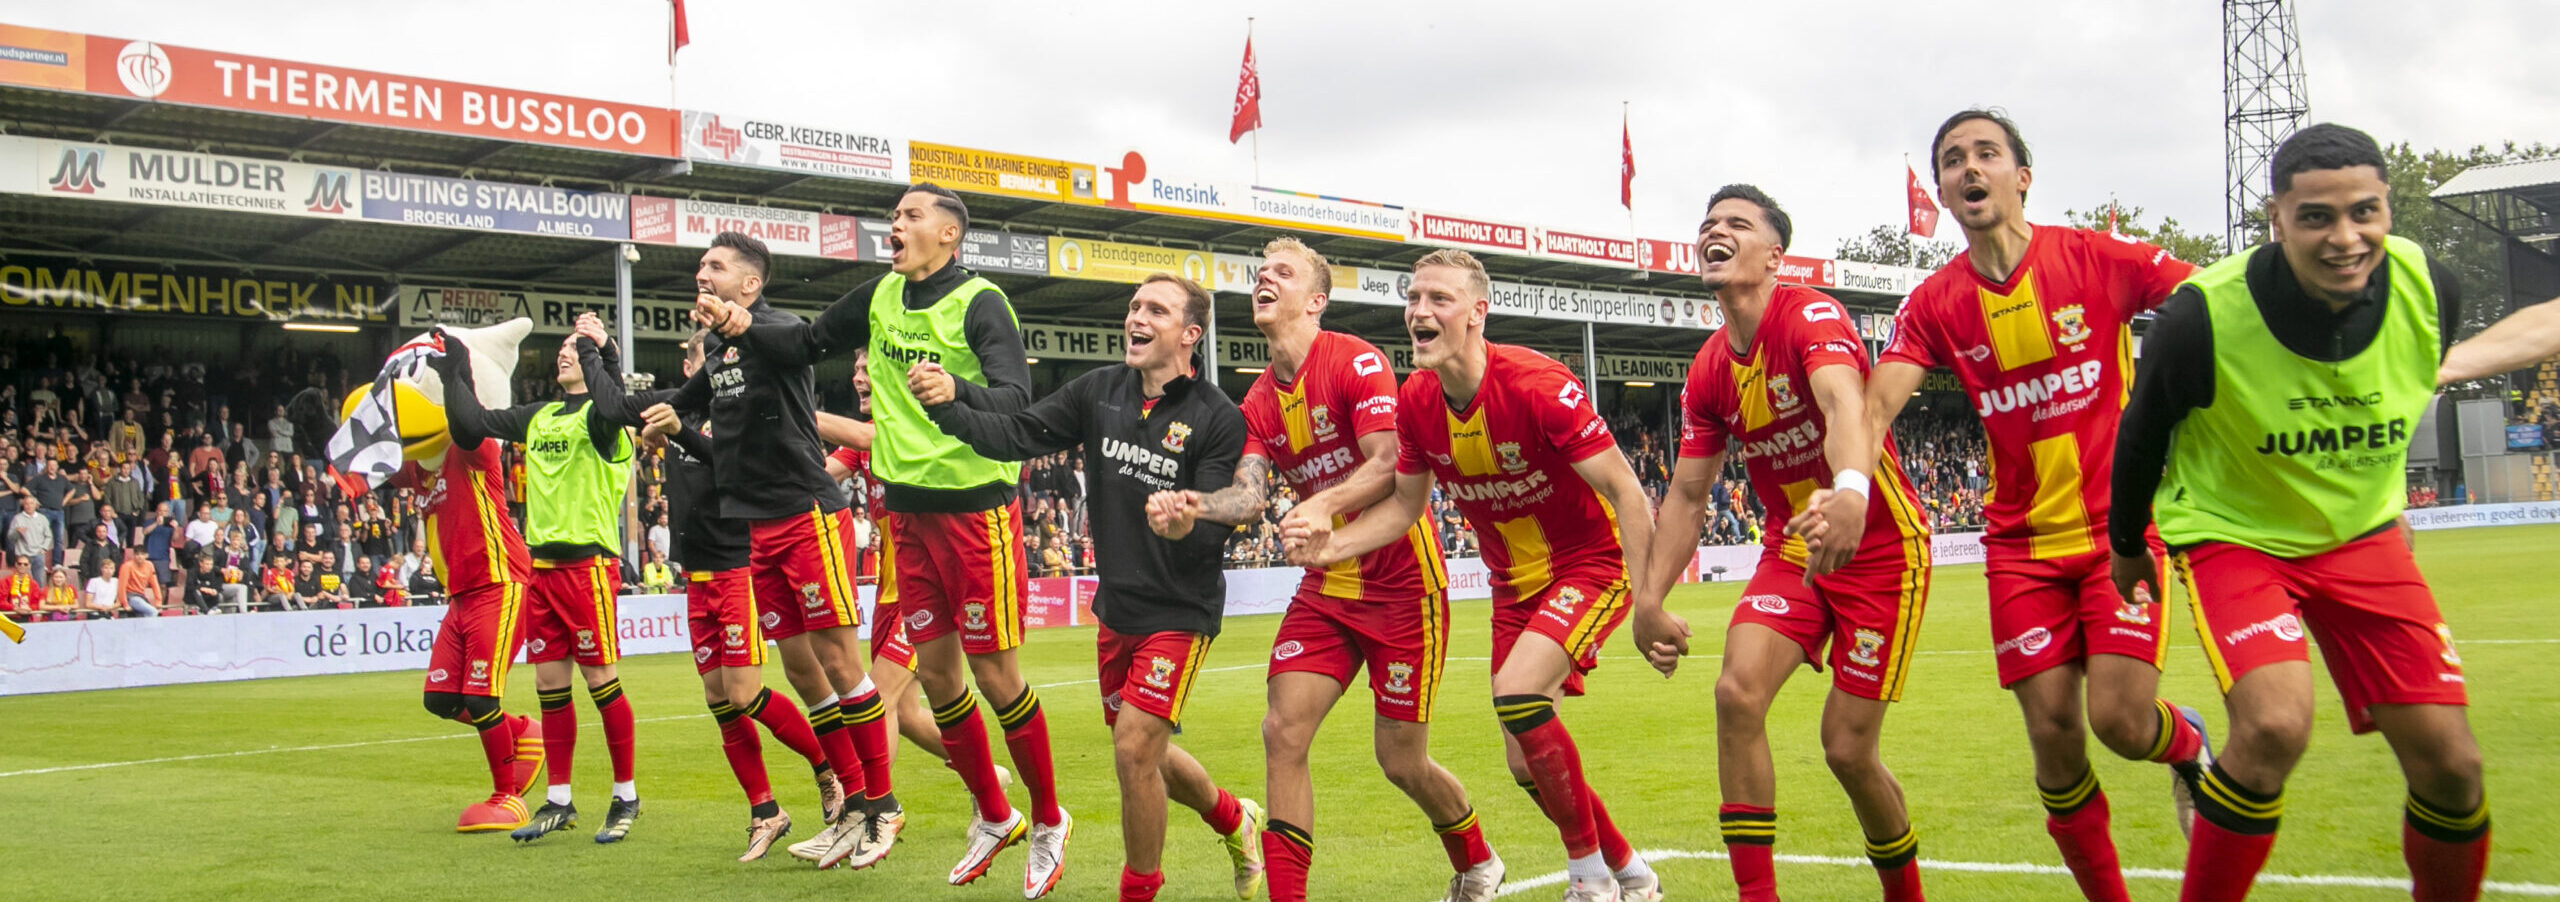 Netherlands: Go Ahead Eagles Vs Pec Zwolle